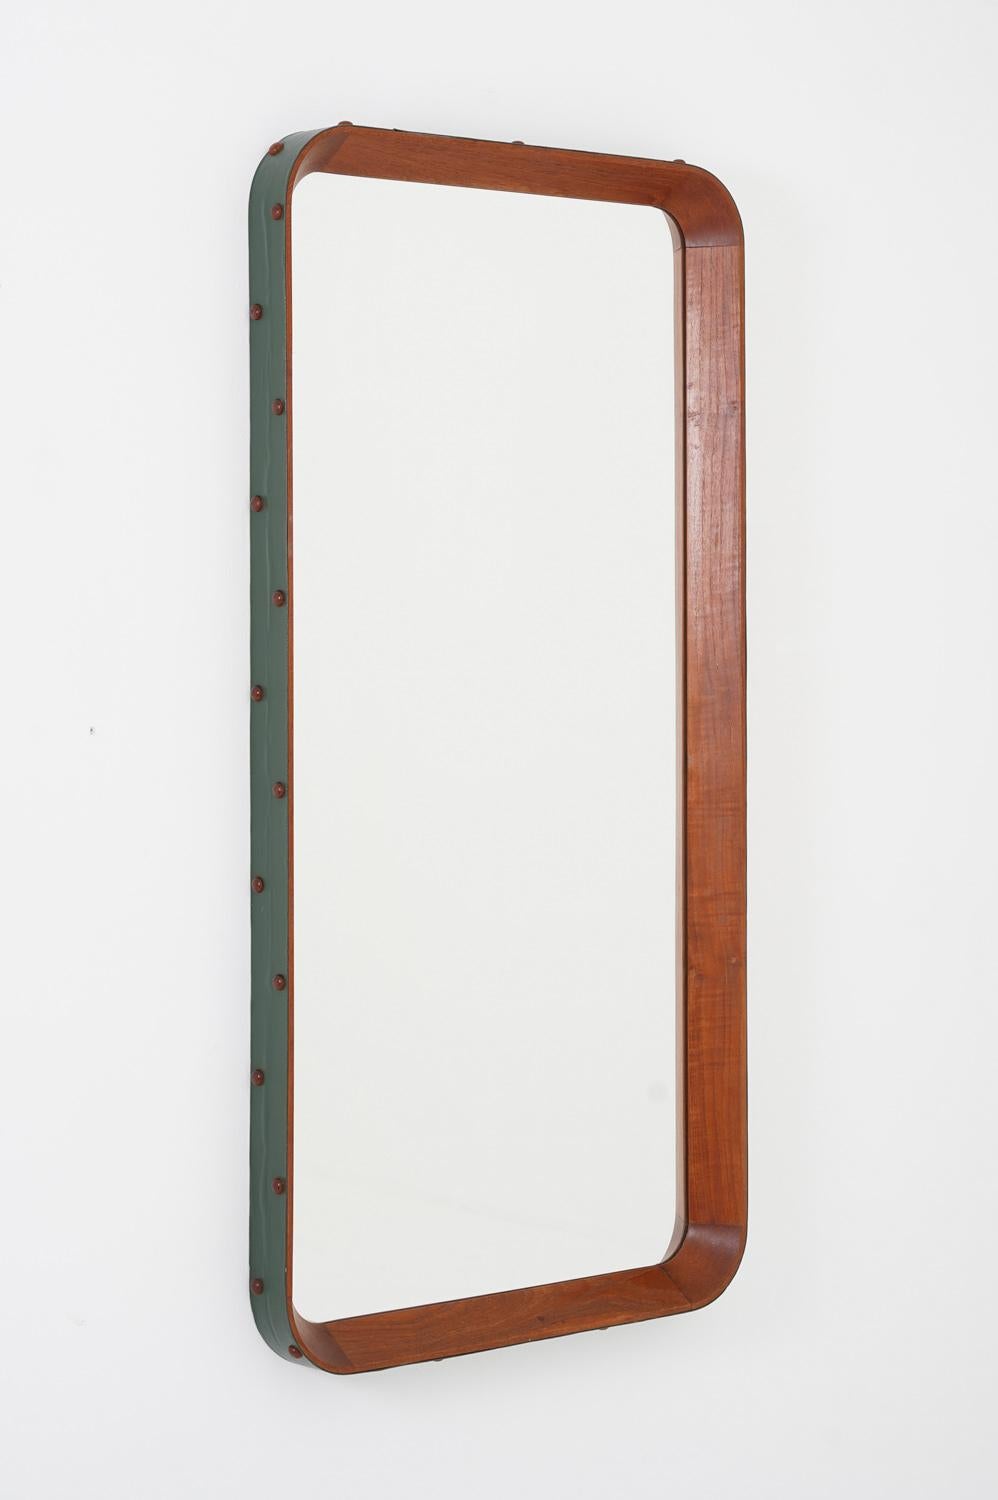 Very rare mirror attributed to Otto Schulz for Boet, Sweden, 1940s.

This large mirror features a solid teak frame covered in green faux leather, kept in place by dowels in teak. 

Condition: Very good condition on both the frame and the mirror